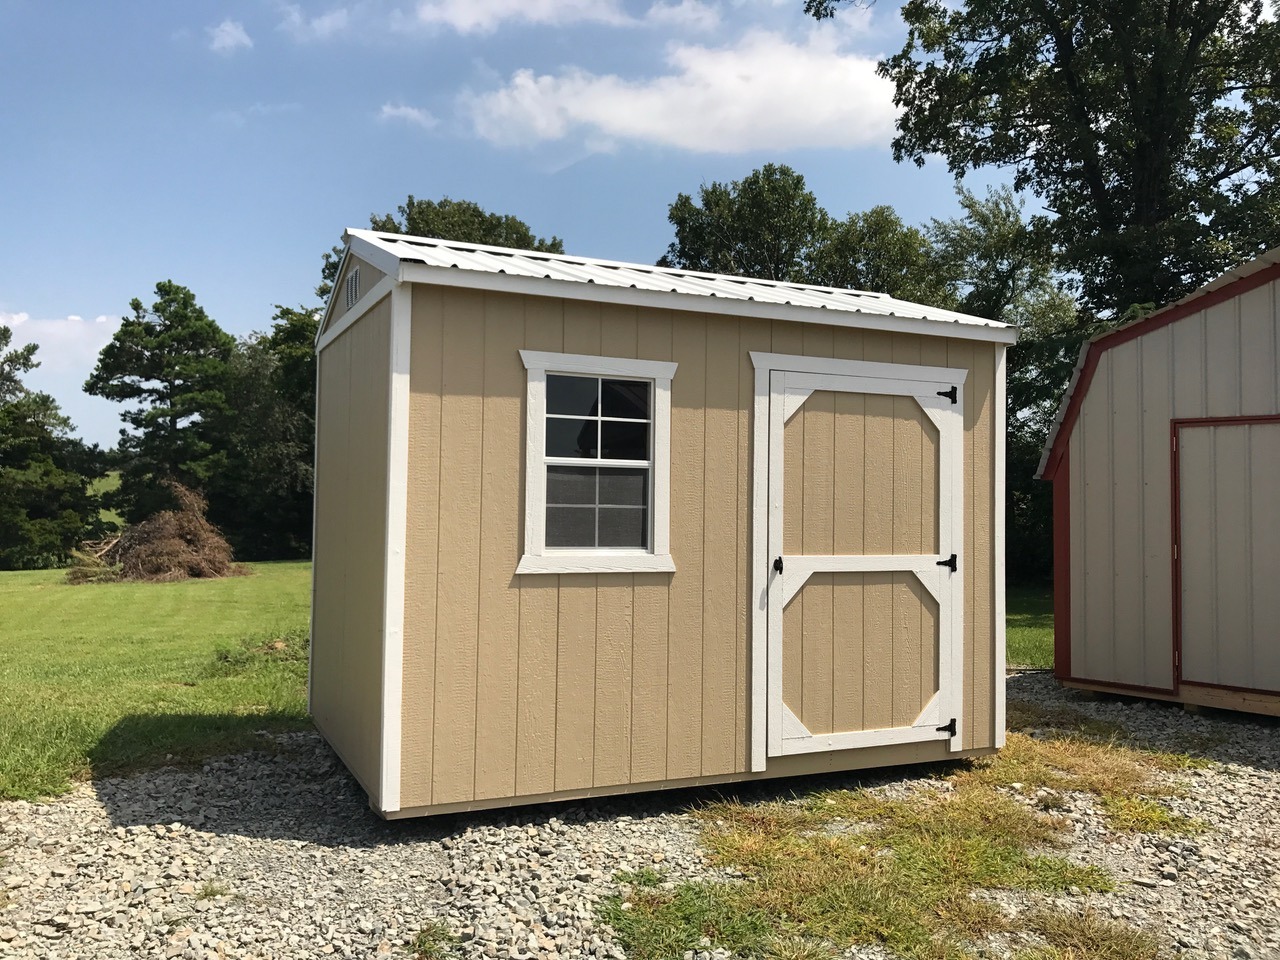 Small express series garden shed